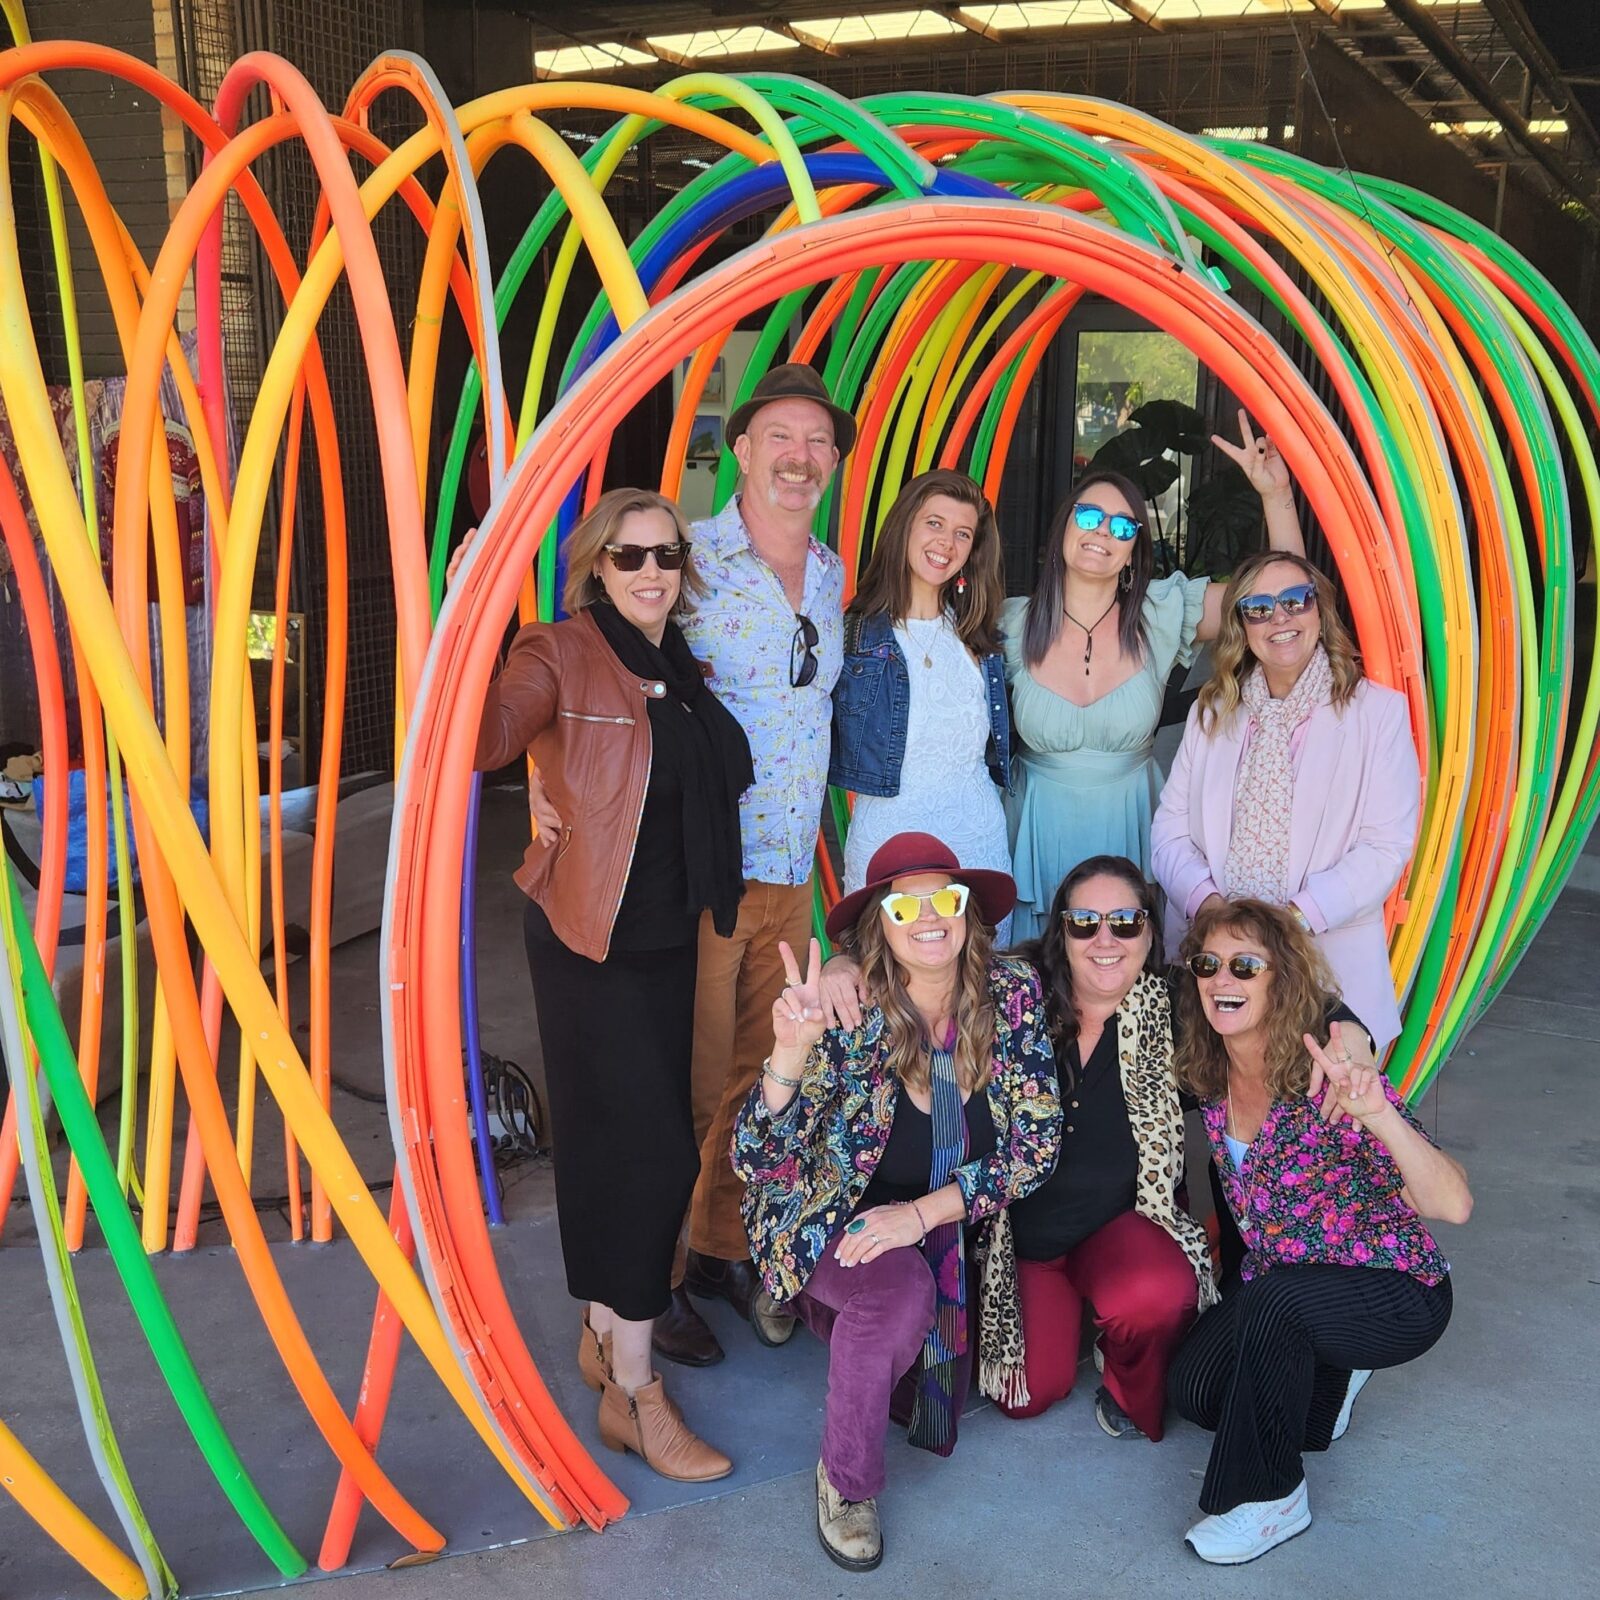 Far Out Tours - Northern NSW starts their Art Gallery & Studio Workshop Tour at M- Arts Precinct .